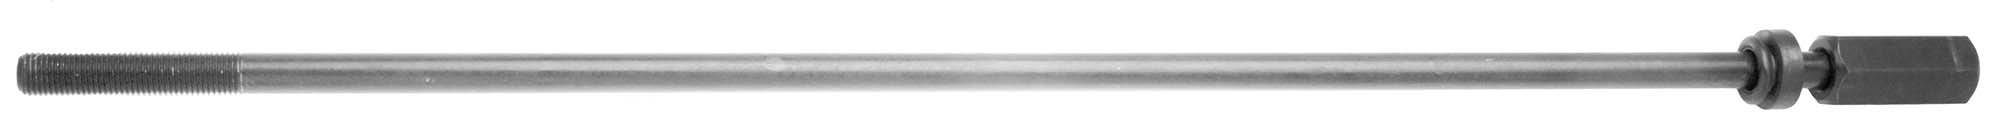 Accurate Mfg Z9005 2J 22-3/4" Replacement Drawbar